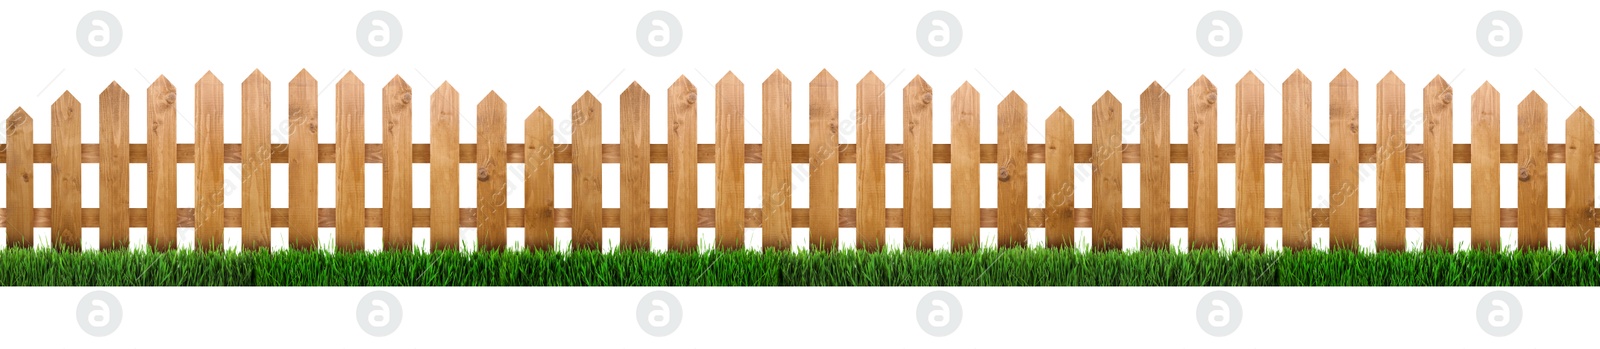 Image of Wooden fence and green grass isolated on white, banner design